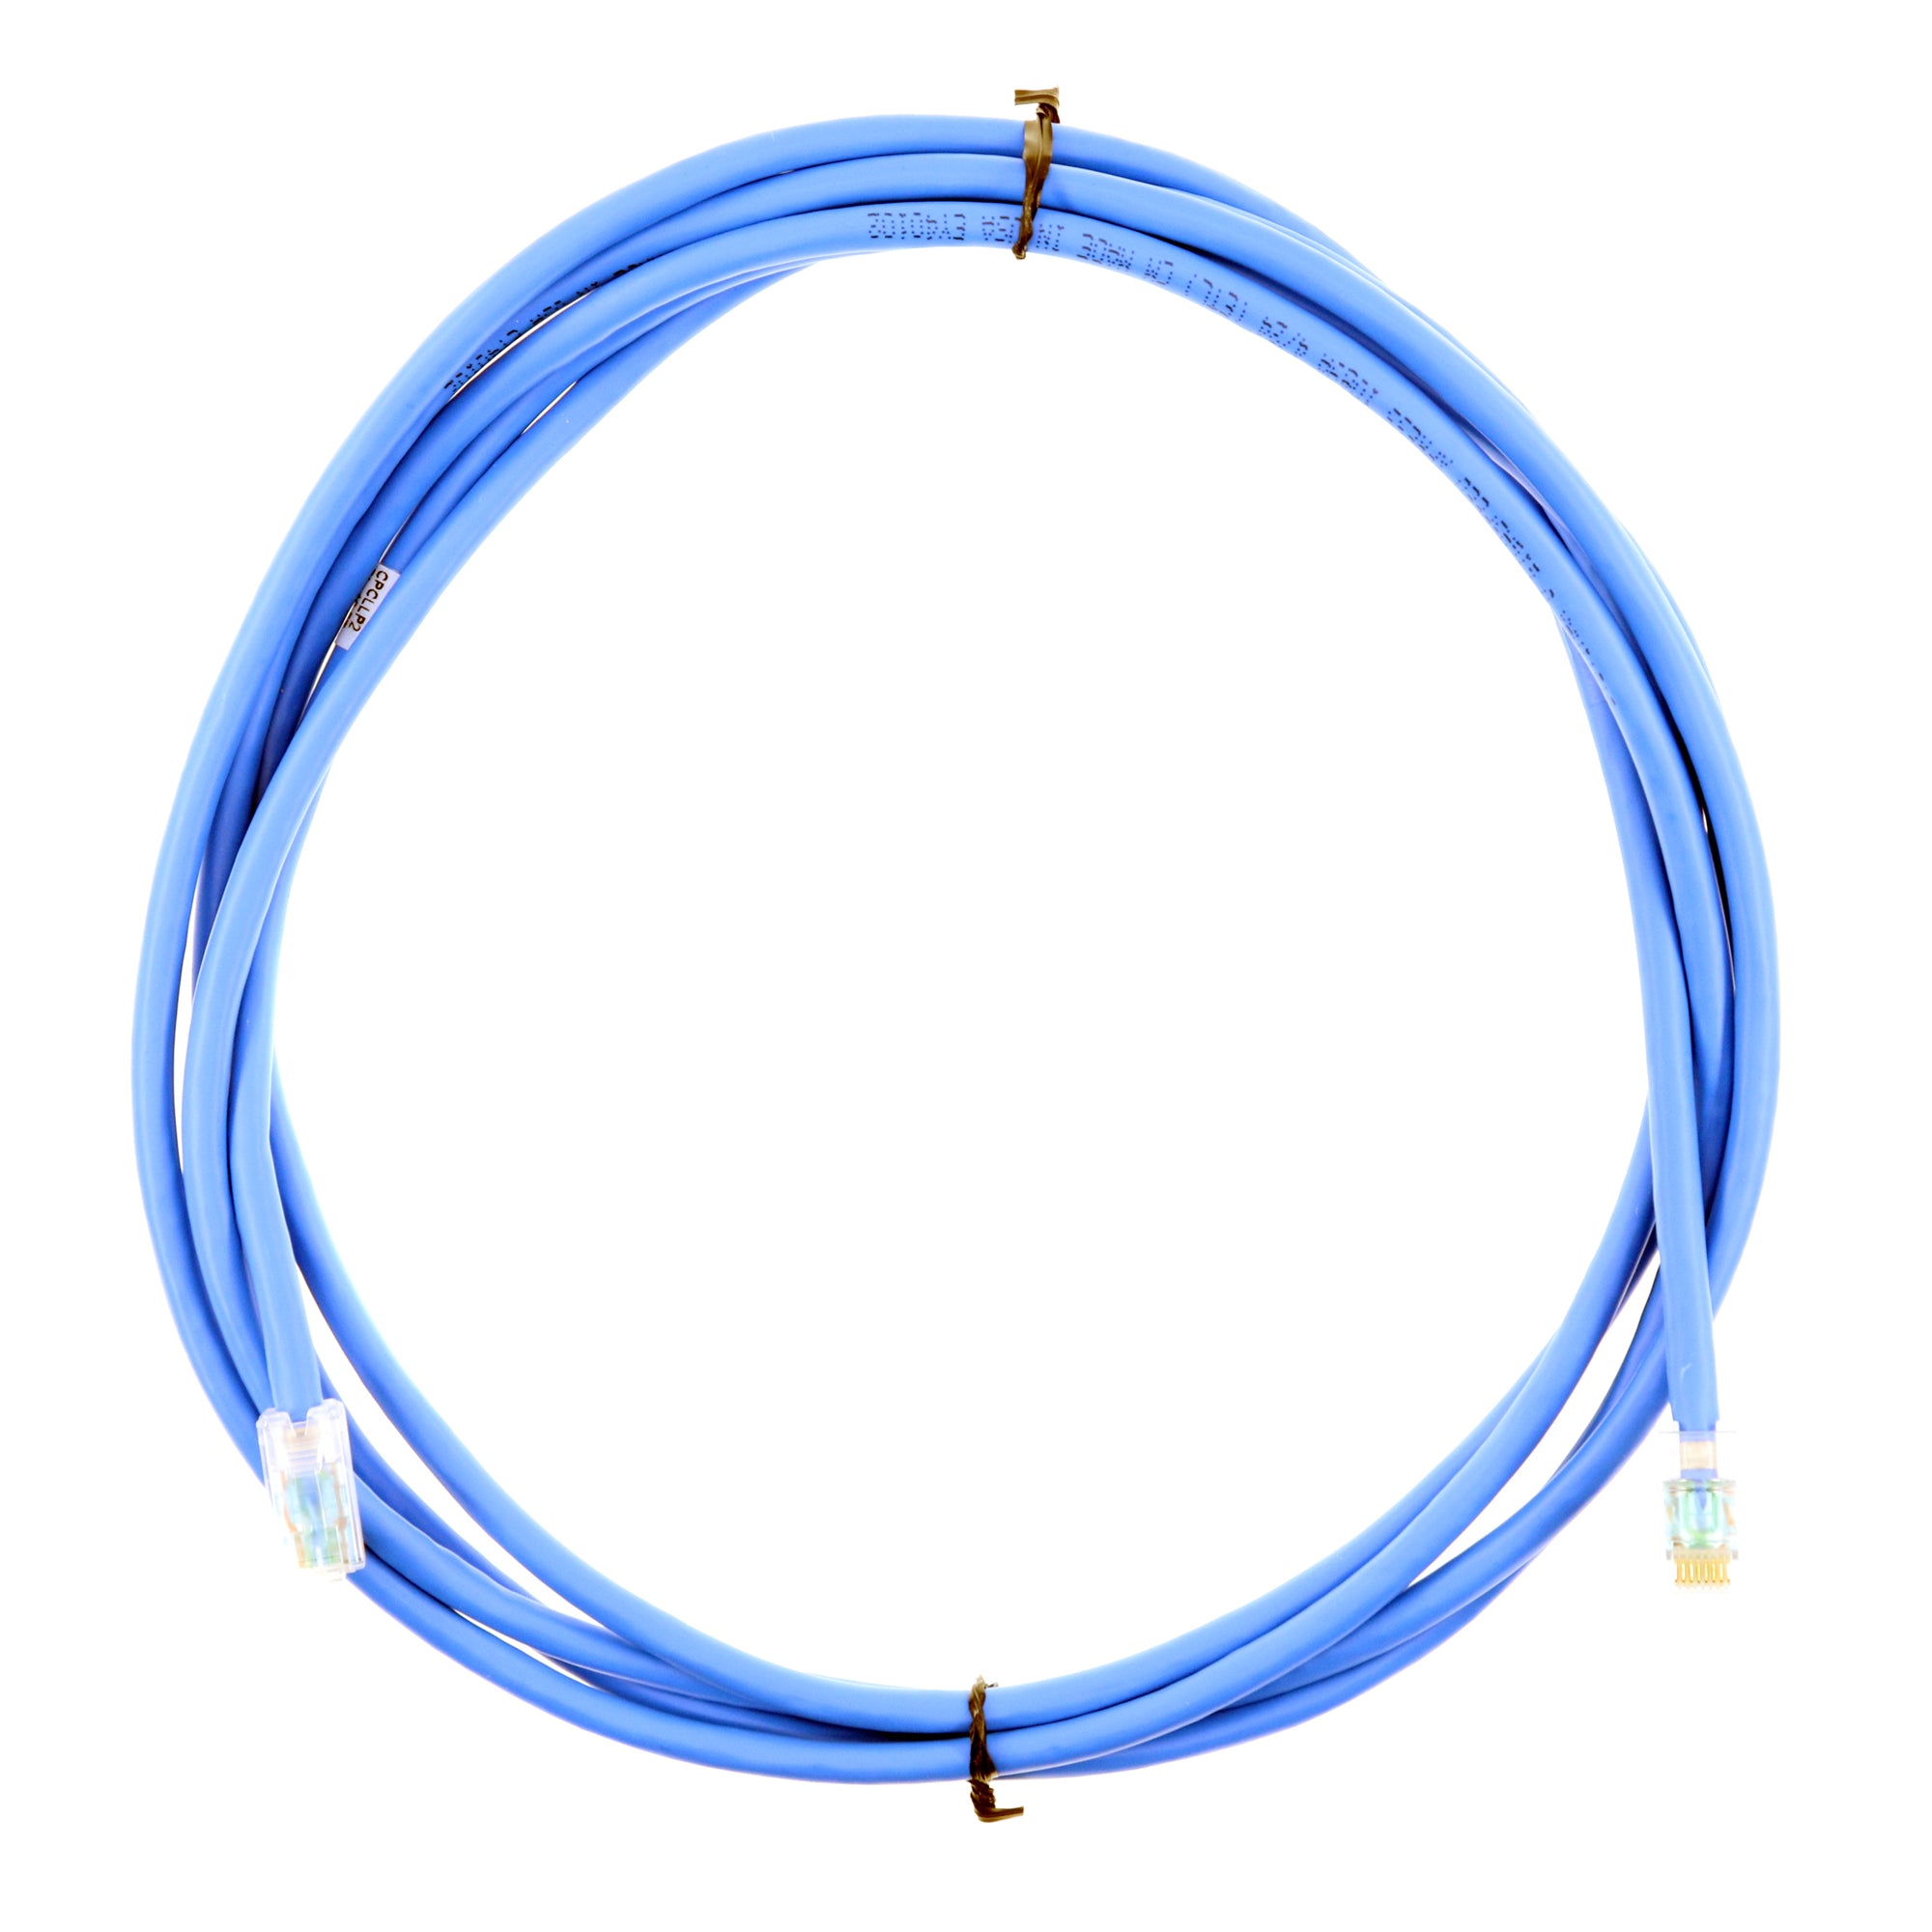 Commscope, COMMSCOPE GSXP-BL-10FT CPCLLP2-0ZF010 BLUE CATEGORY-6 PATCH CABLE, 10' (10-PACK)